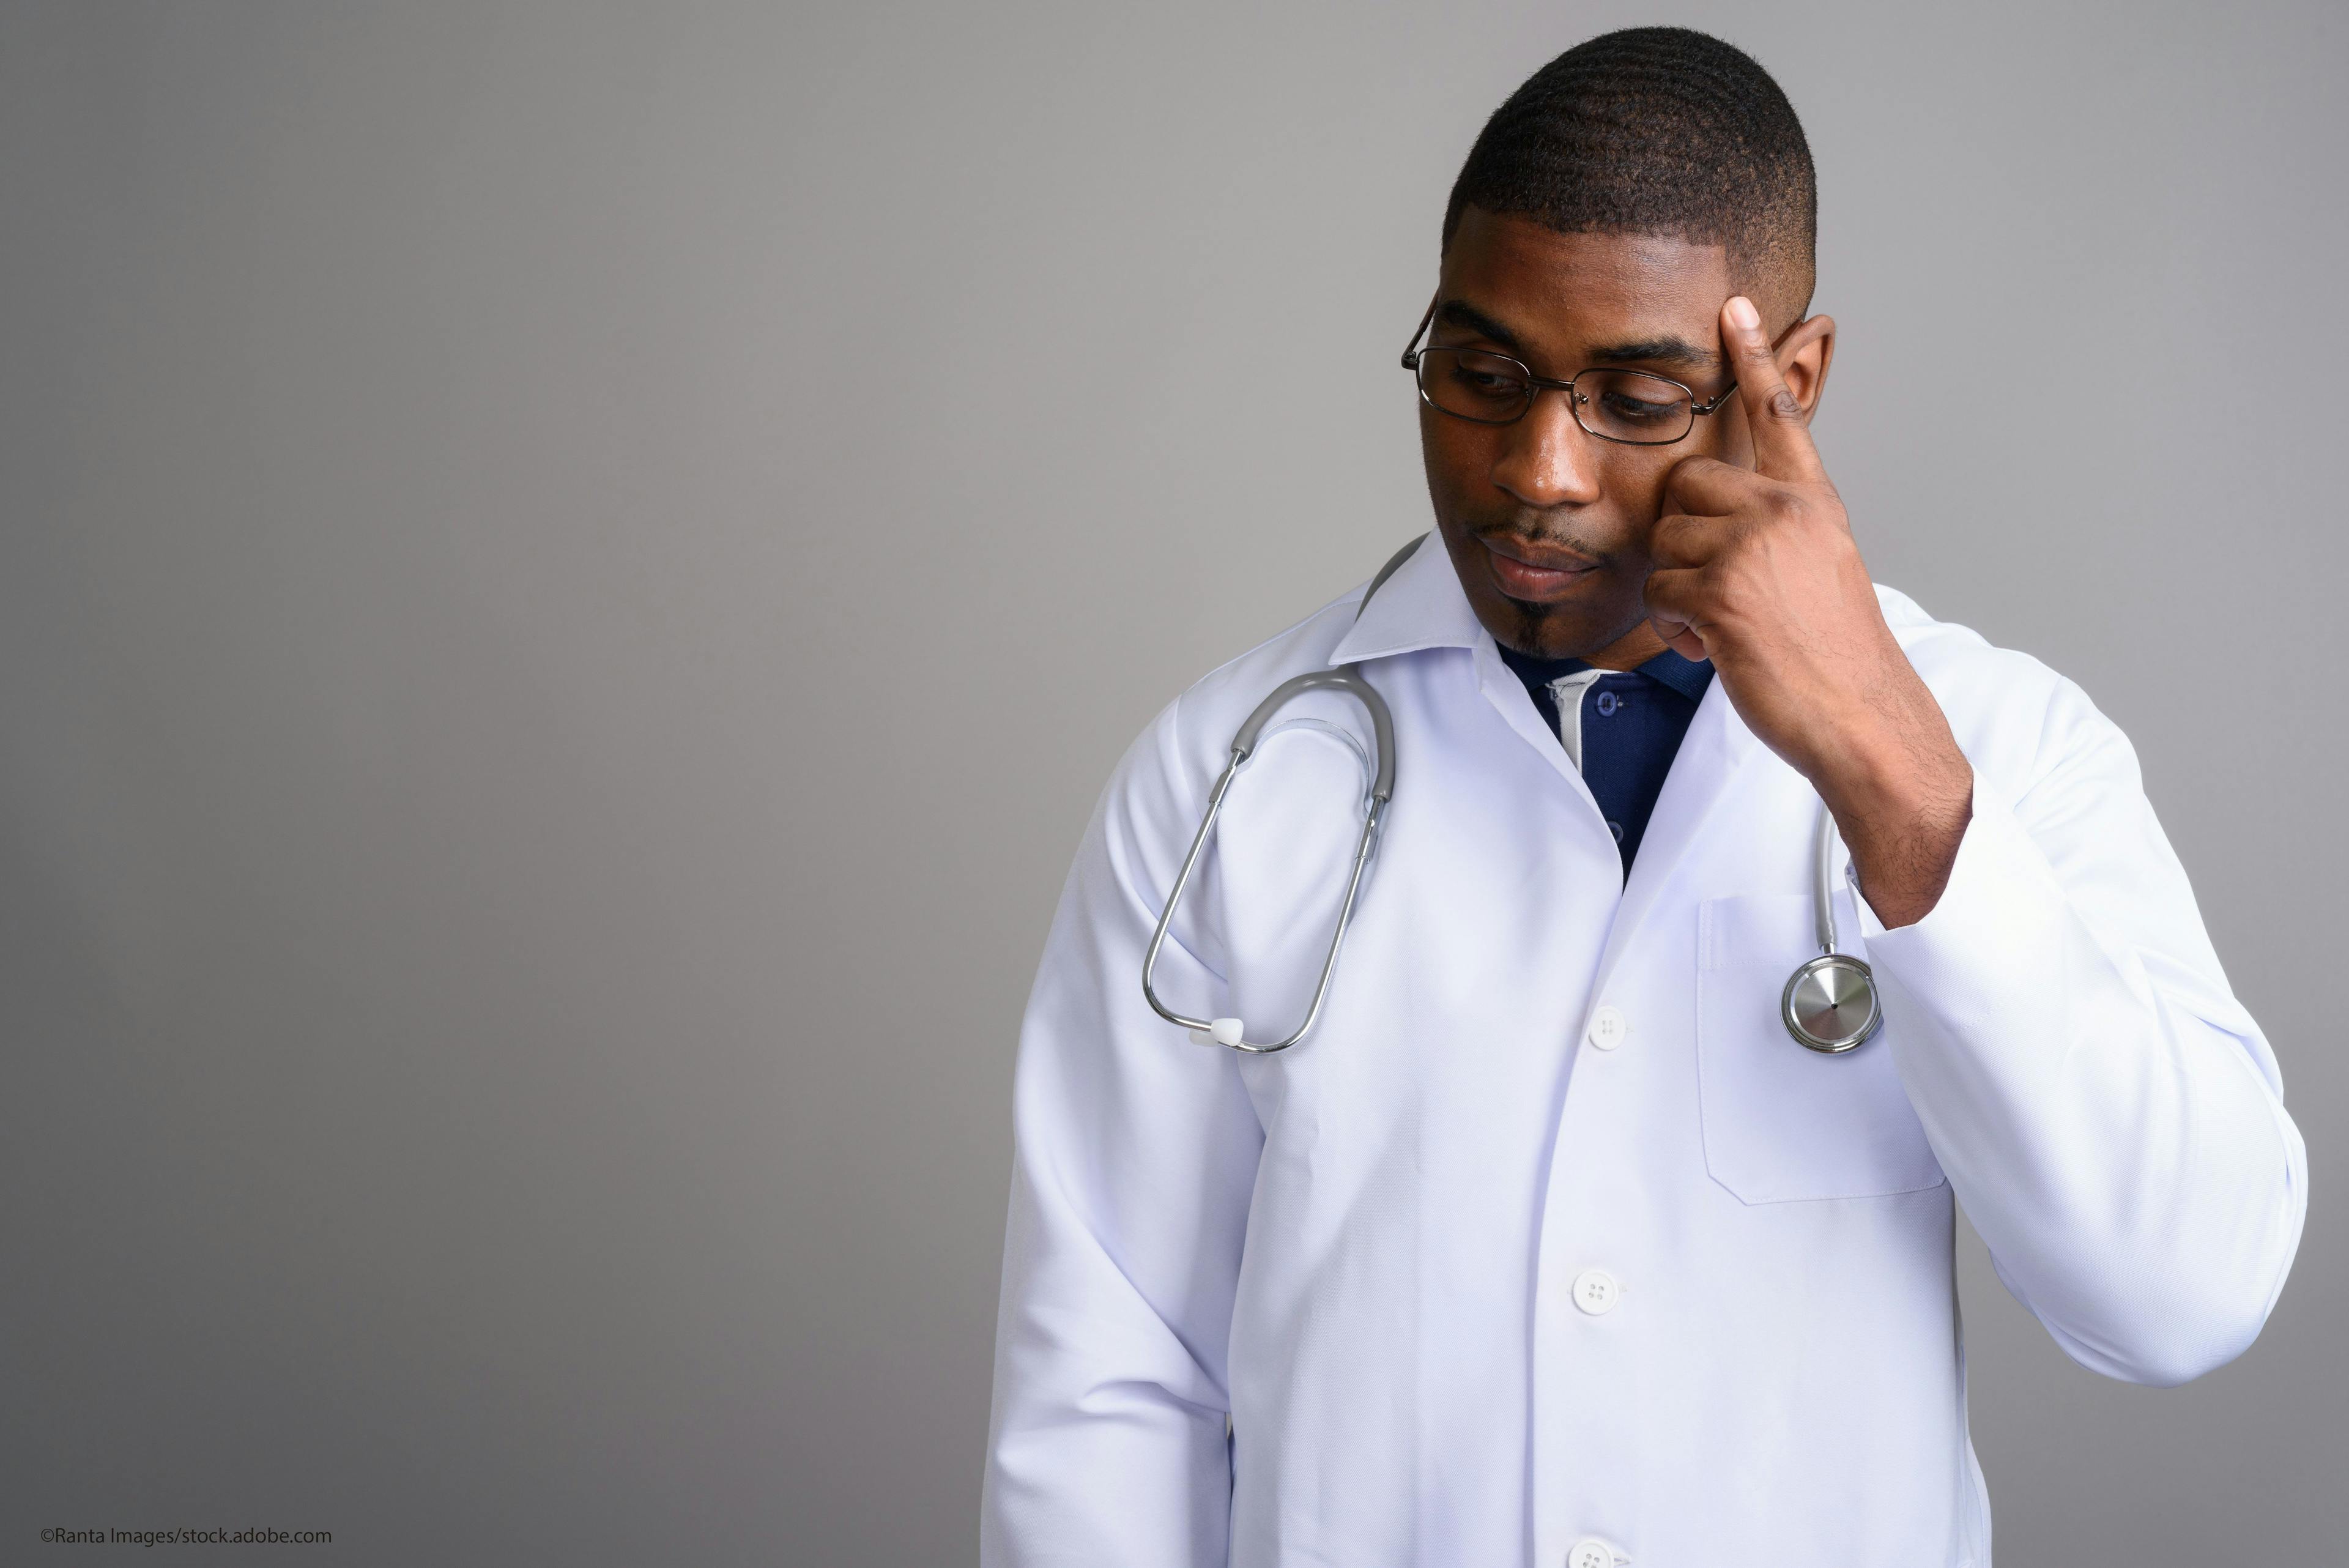 Who should physicians talk to when they are unhappy in their job?